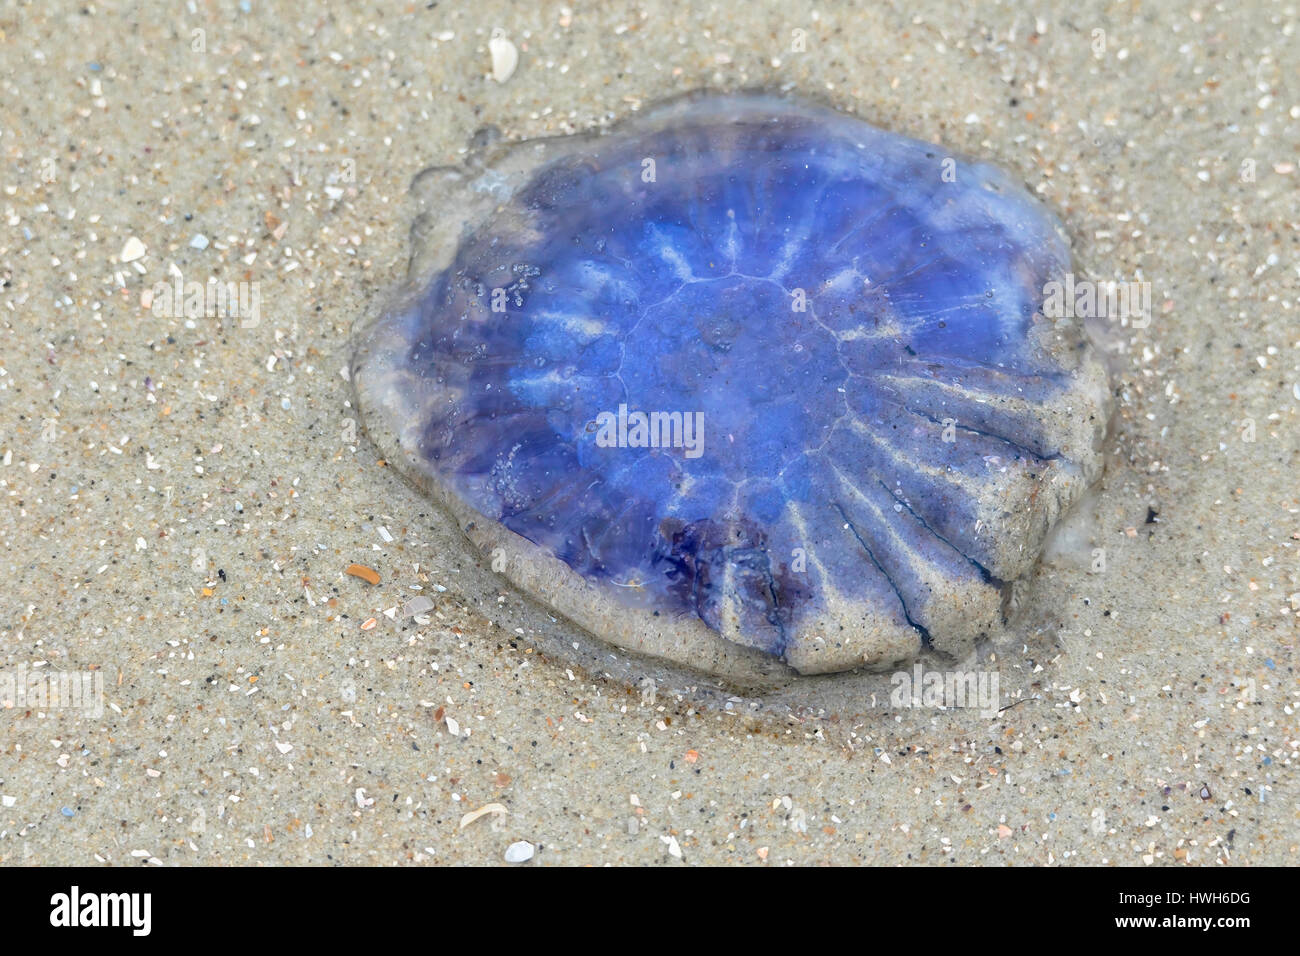 'Blue nettle jellyfish on the beach, Germany; Lower Saxony; East Friesland; the East Frisians, Juist, jellyfishes, blue nettle jellyfish, Cyanea lamar Stock Photo